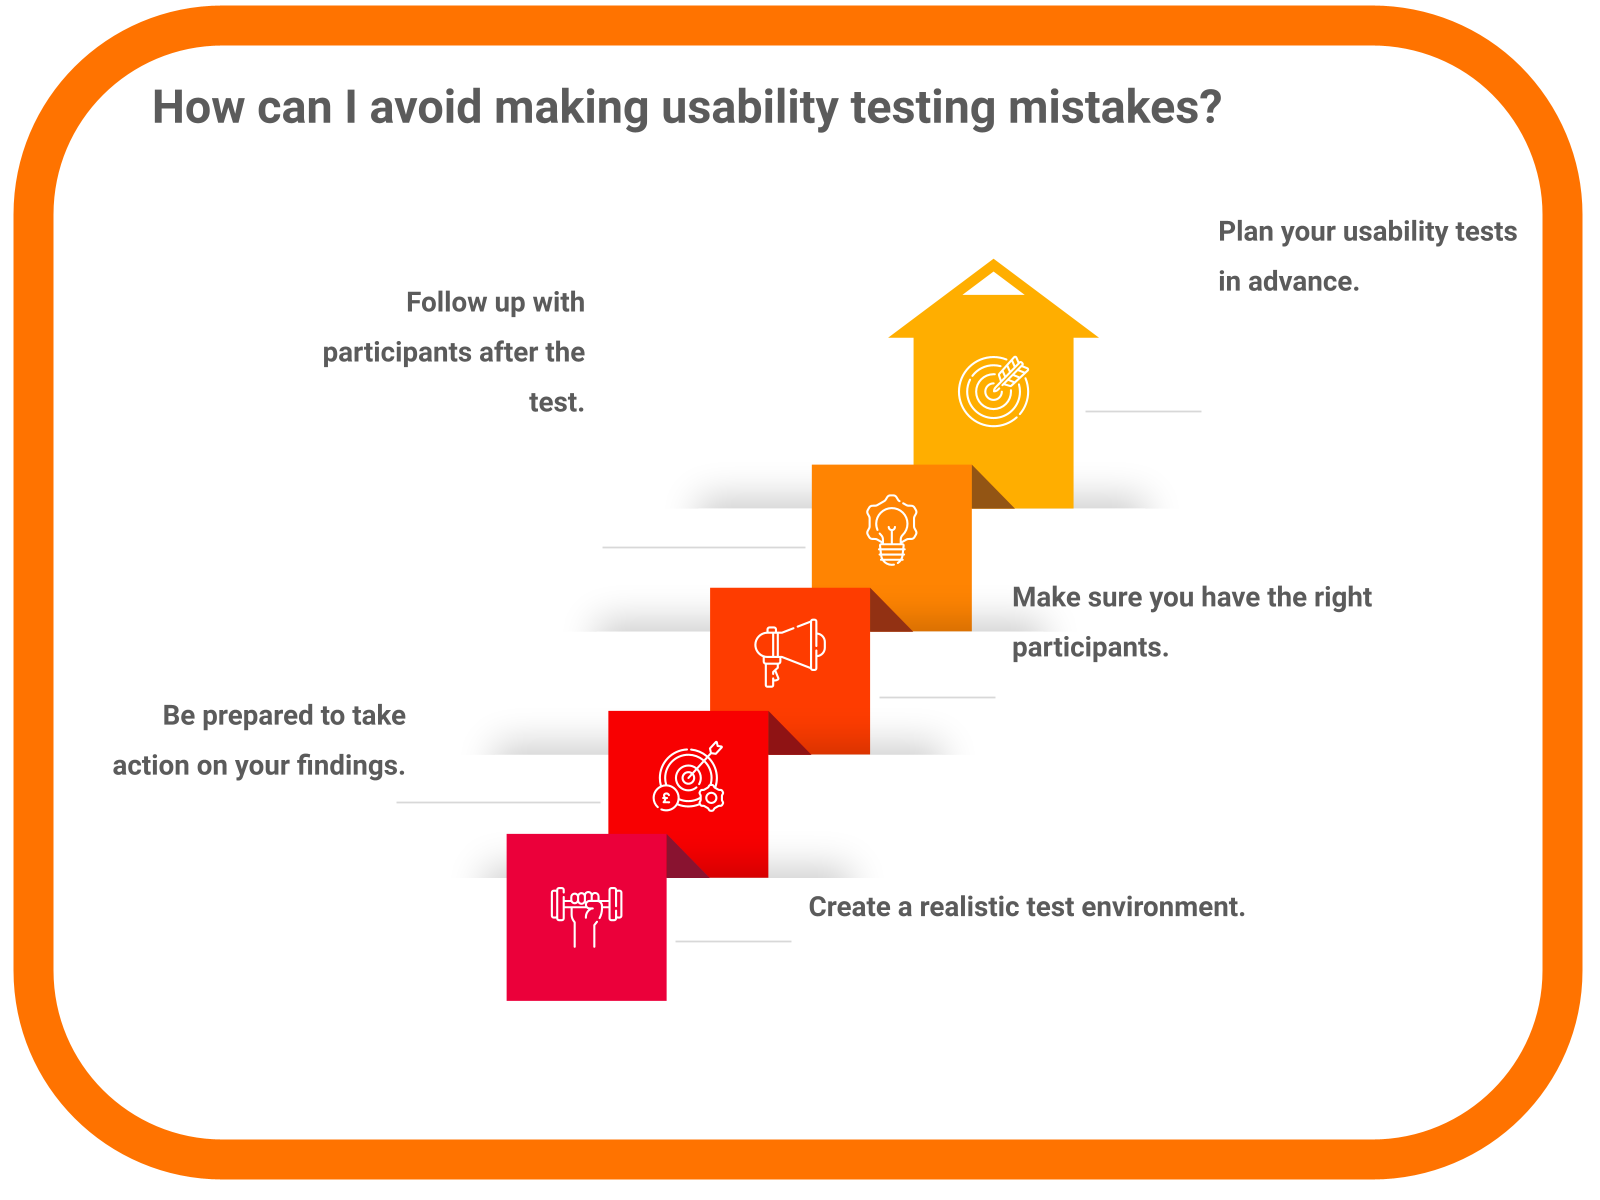 How can I avoid making usability testing mistakes to improve conversion rate?